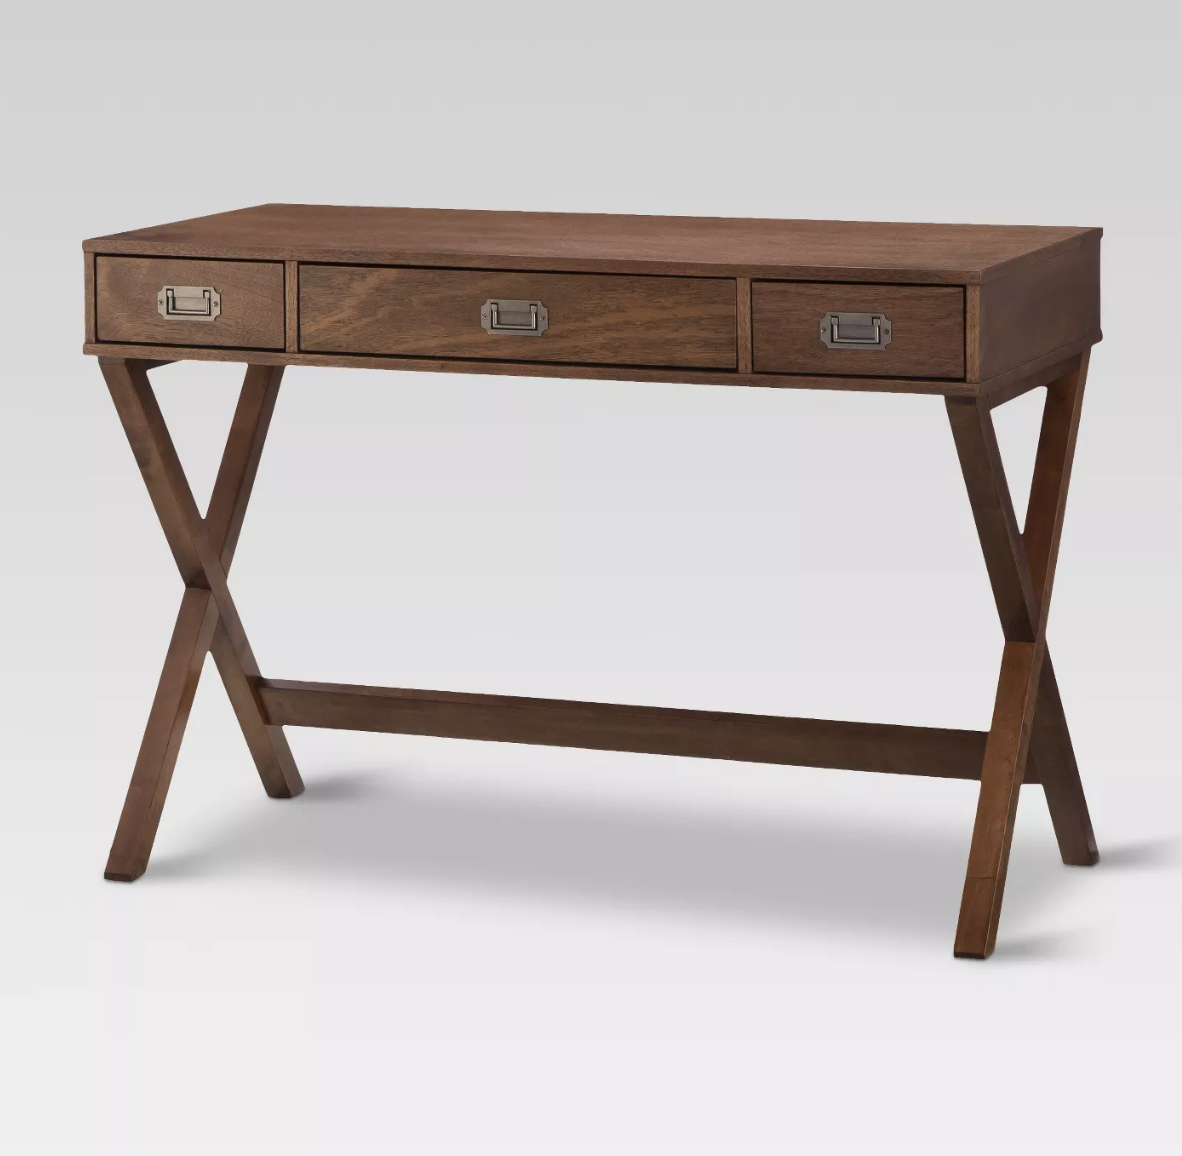 Target - Campaign Wood Writing Desk with Drawers - $150